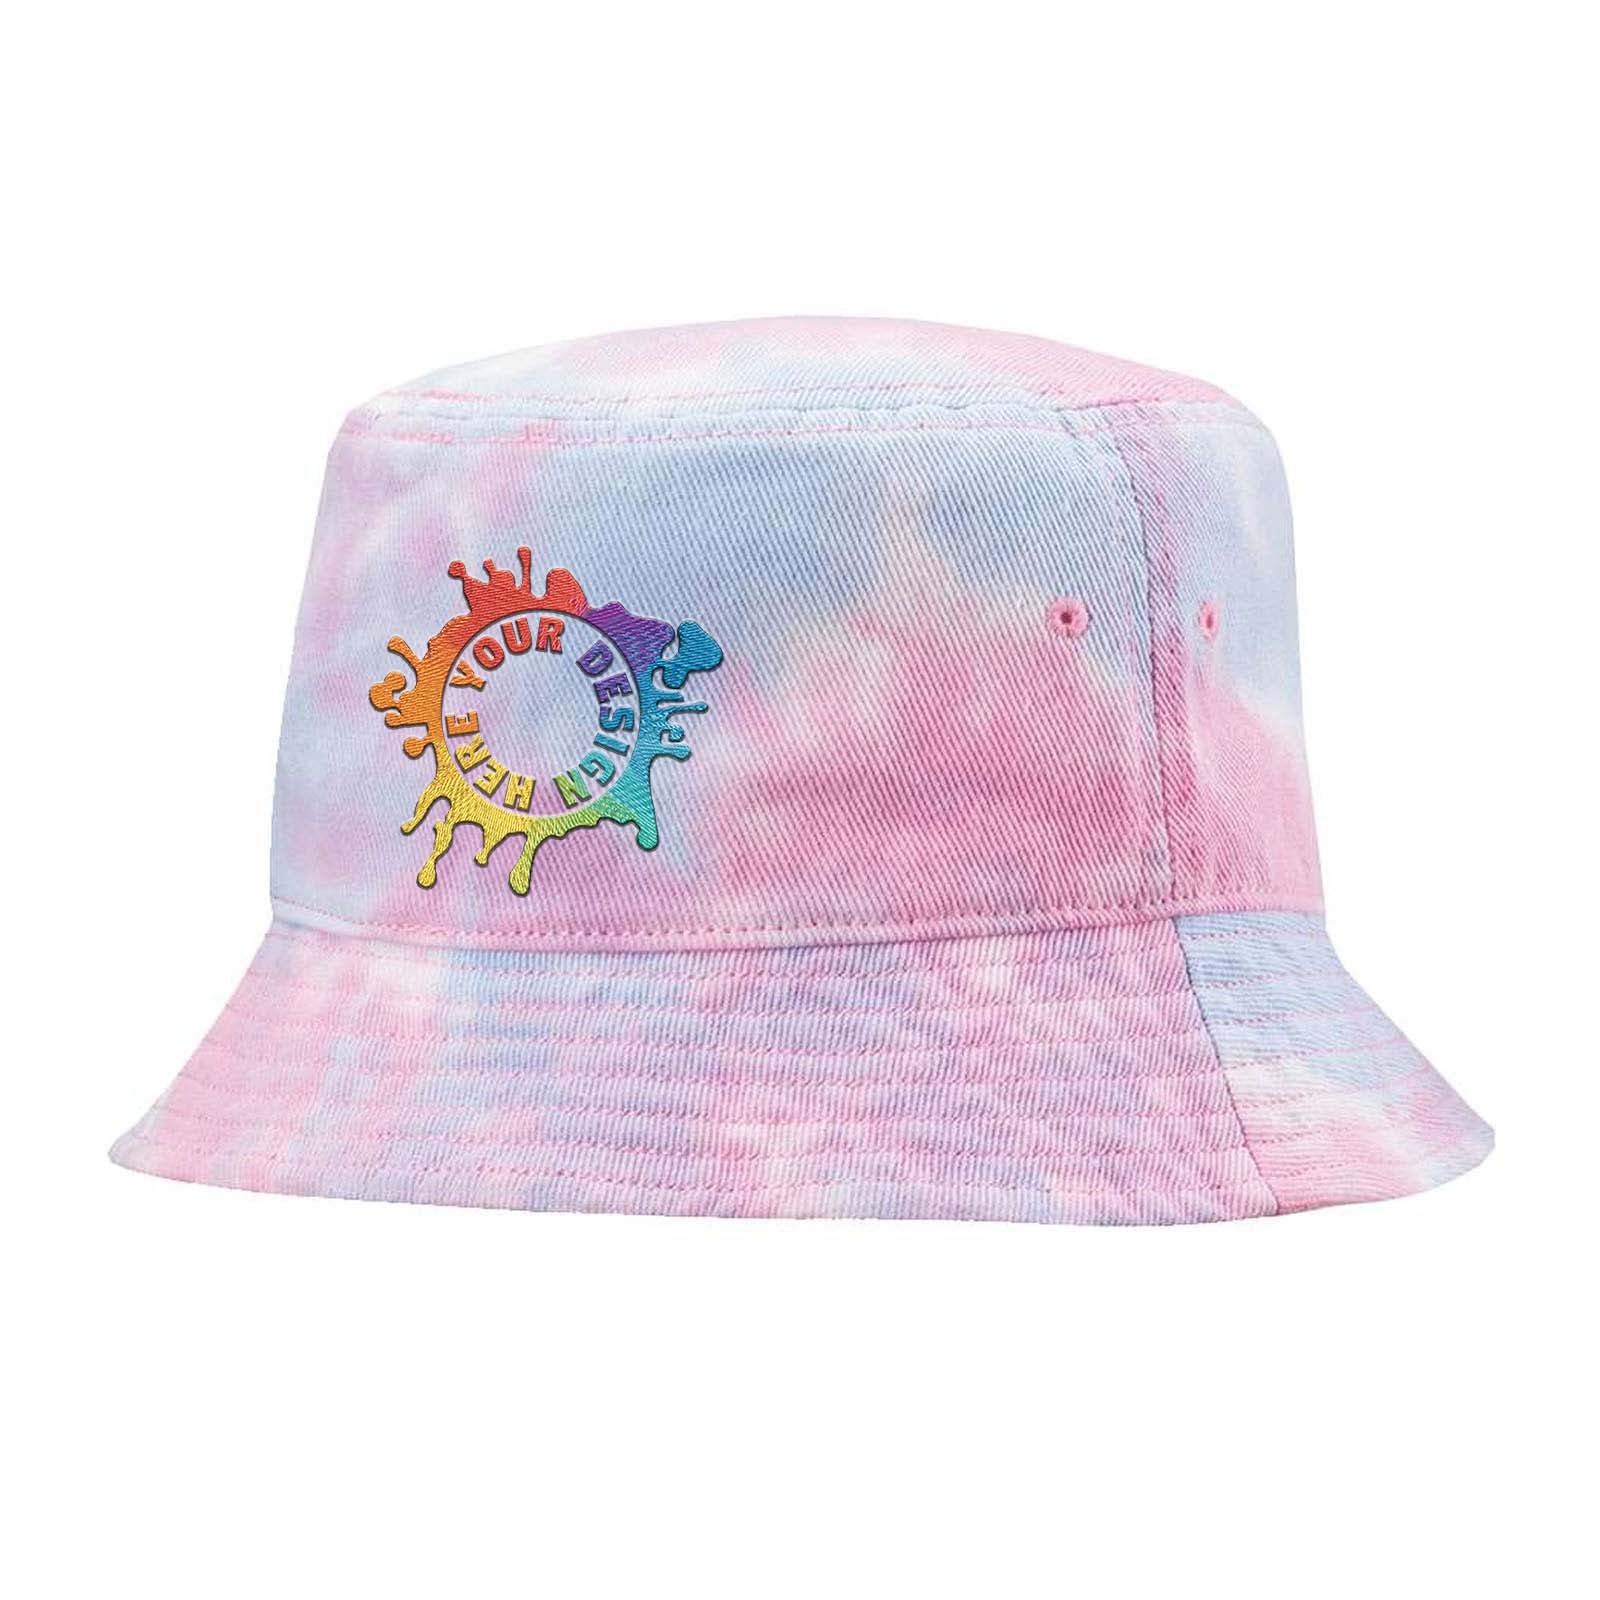 Embroidered Sportsman Tie-Dyed Bucket Cap - Mato & Hash